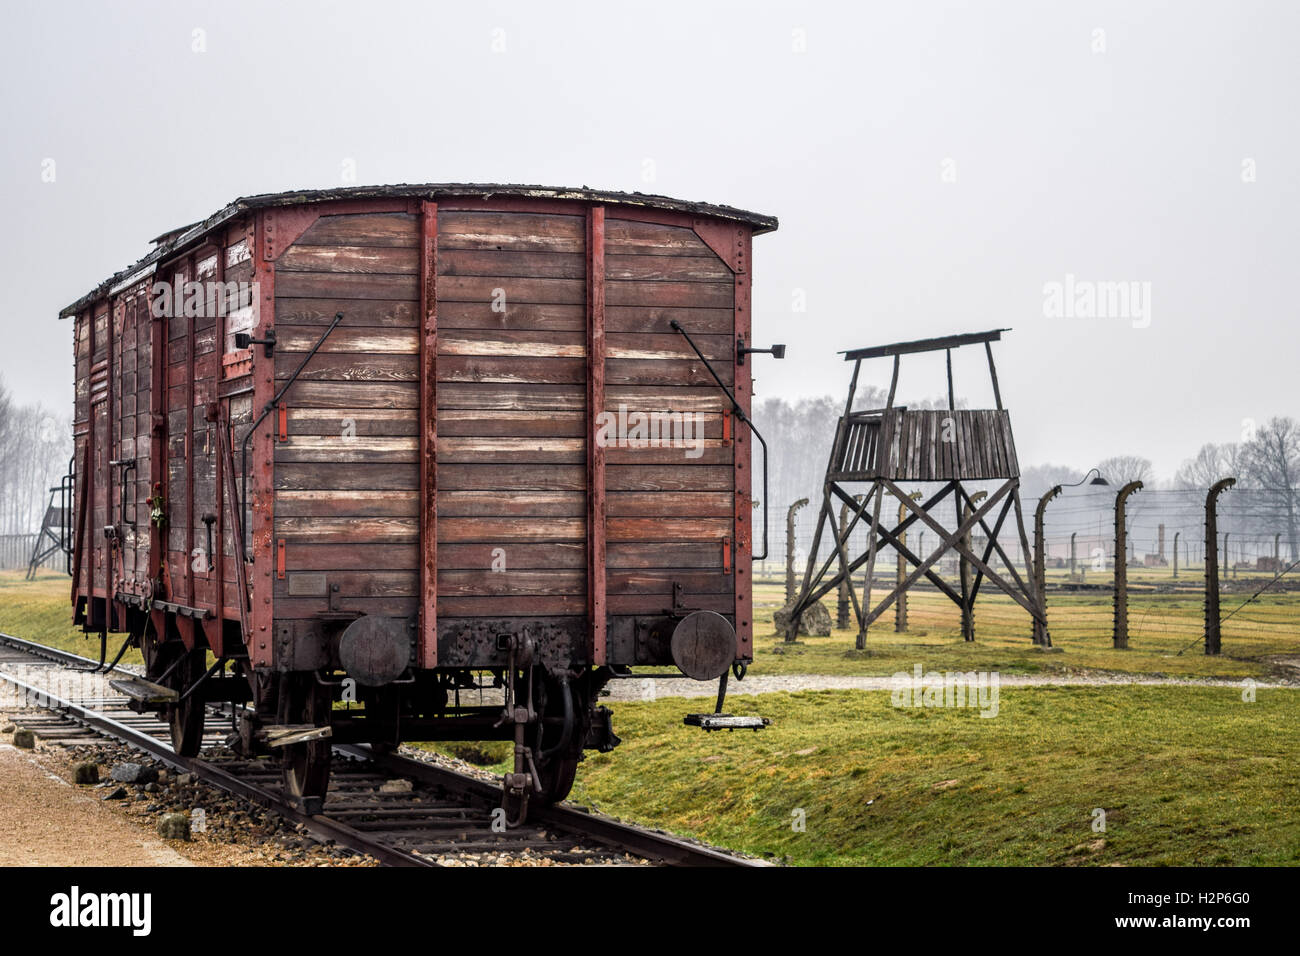 Train cart at Birkenau concentration camp in Poland Stock Photo